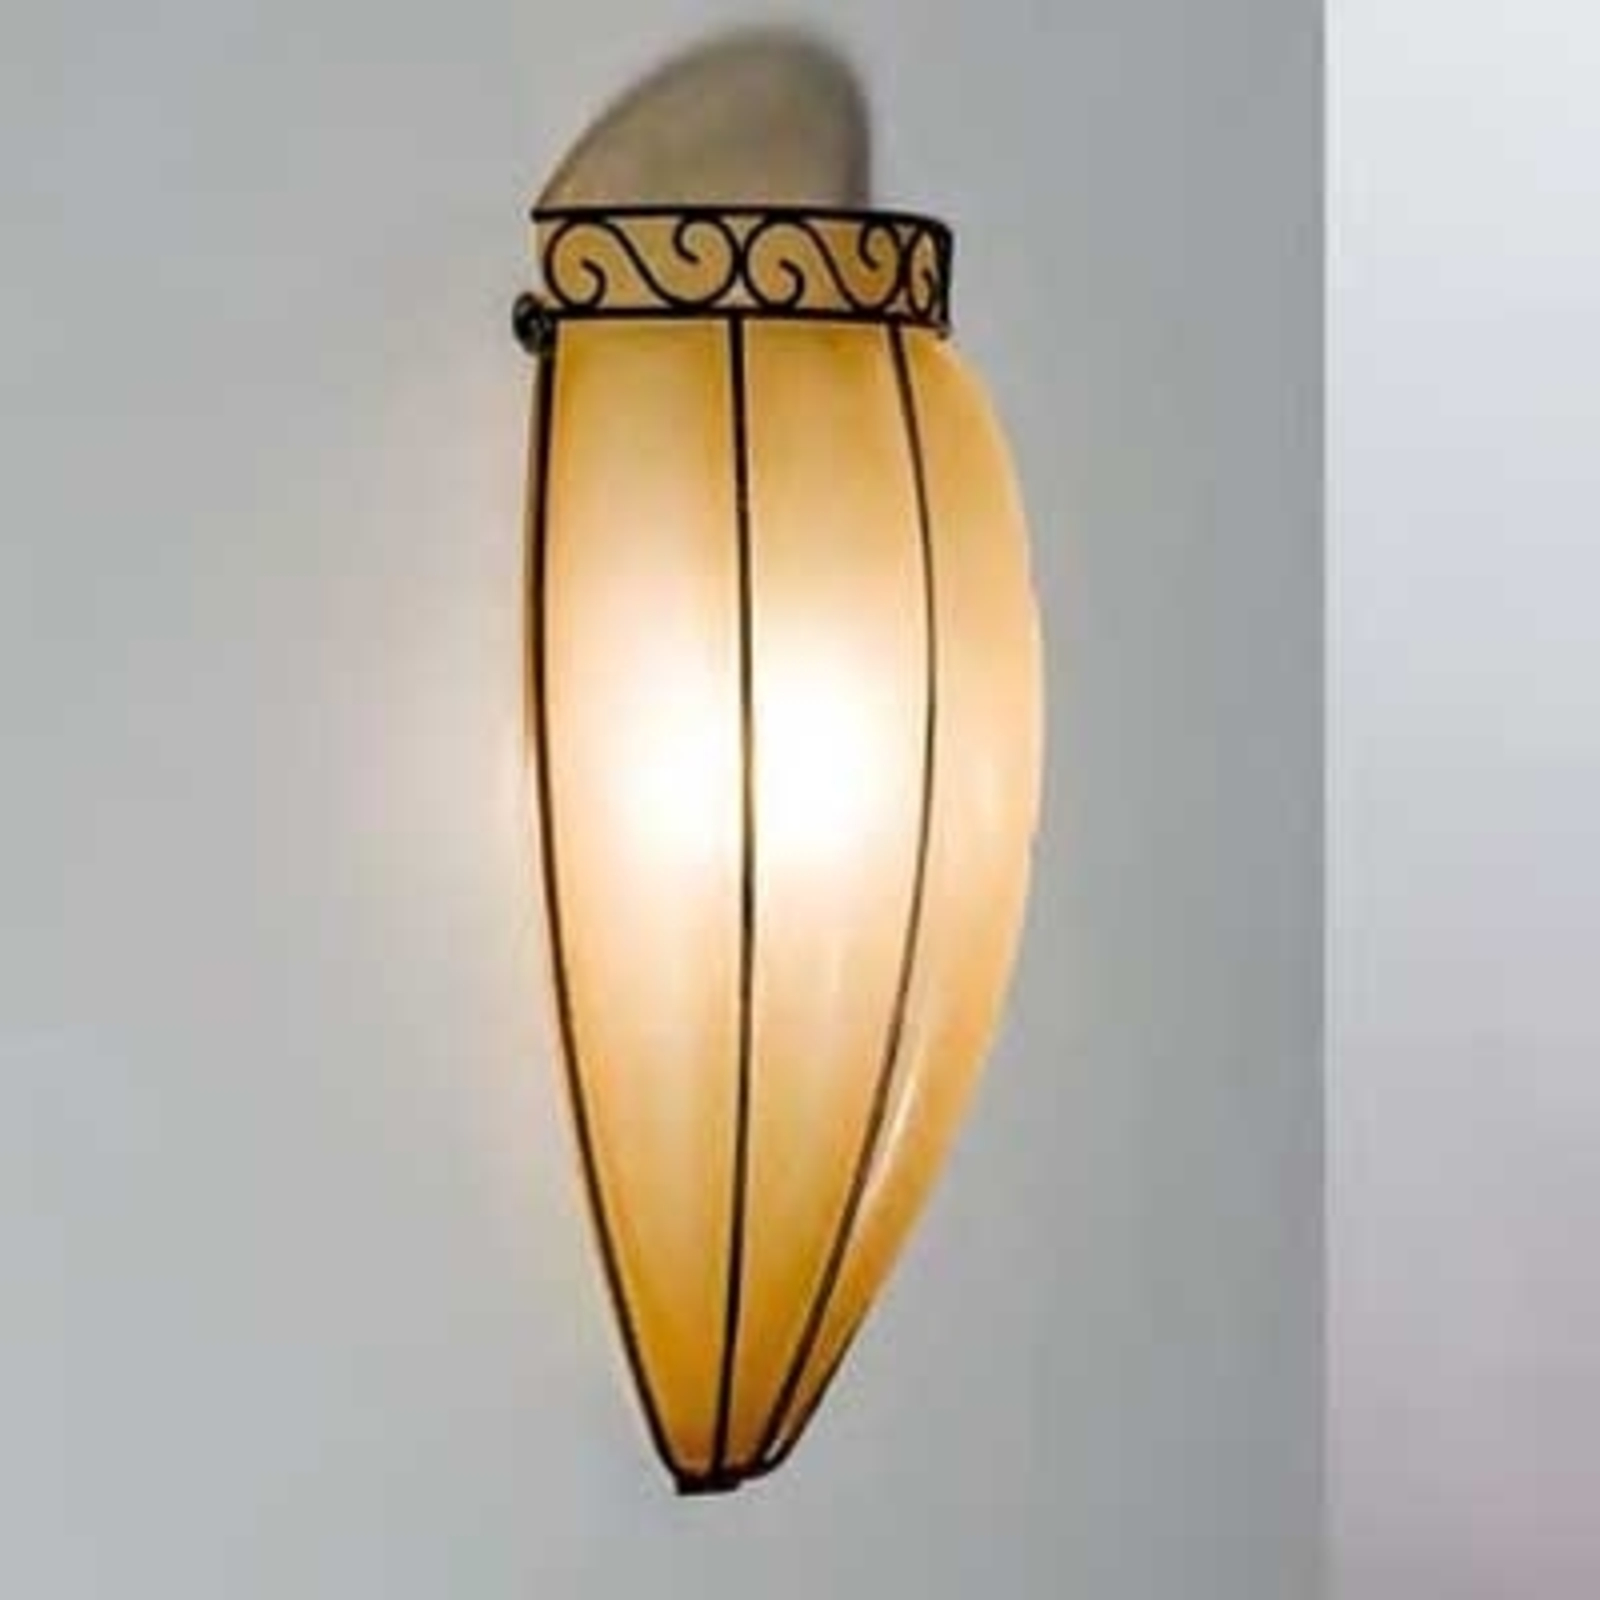 Antique-looking TULIPANO wall light